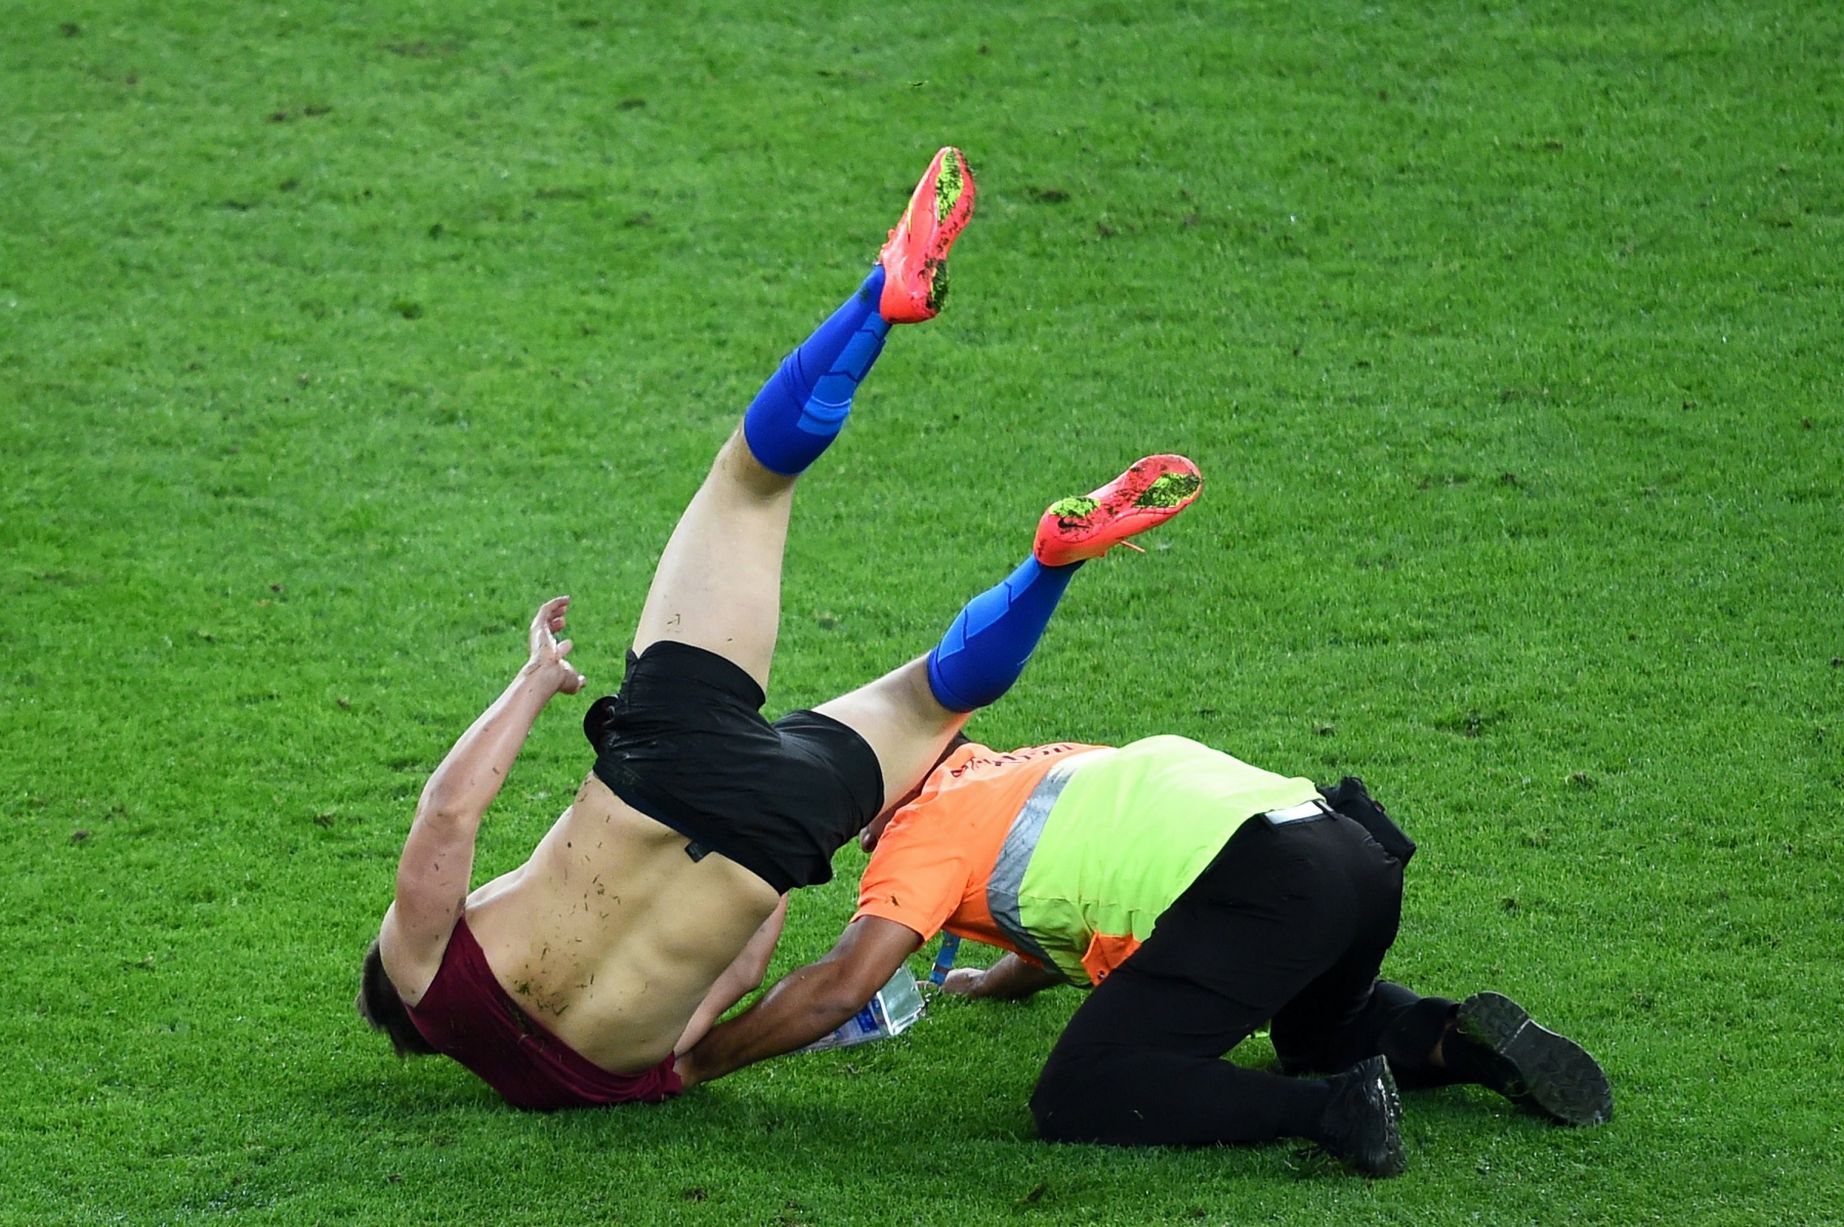 [PHOTOS] Did You See A Streaker During The World Cup Final?